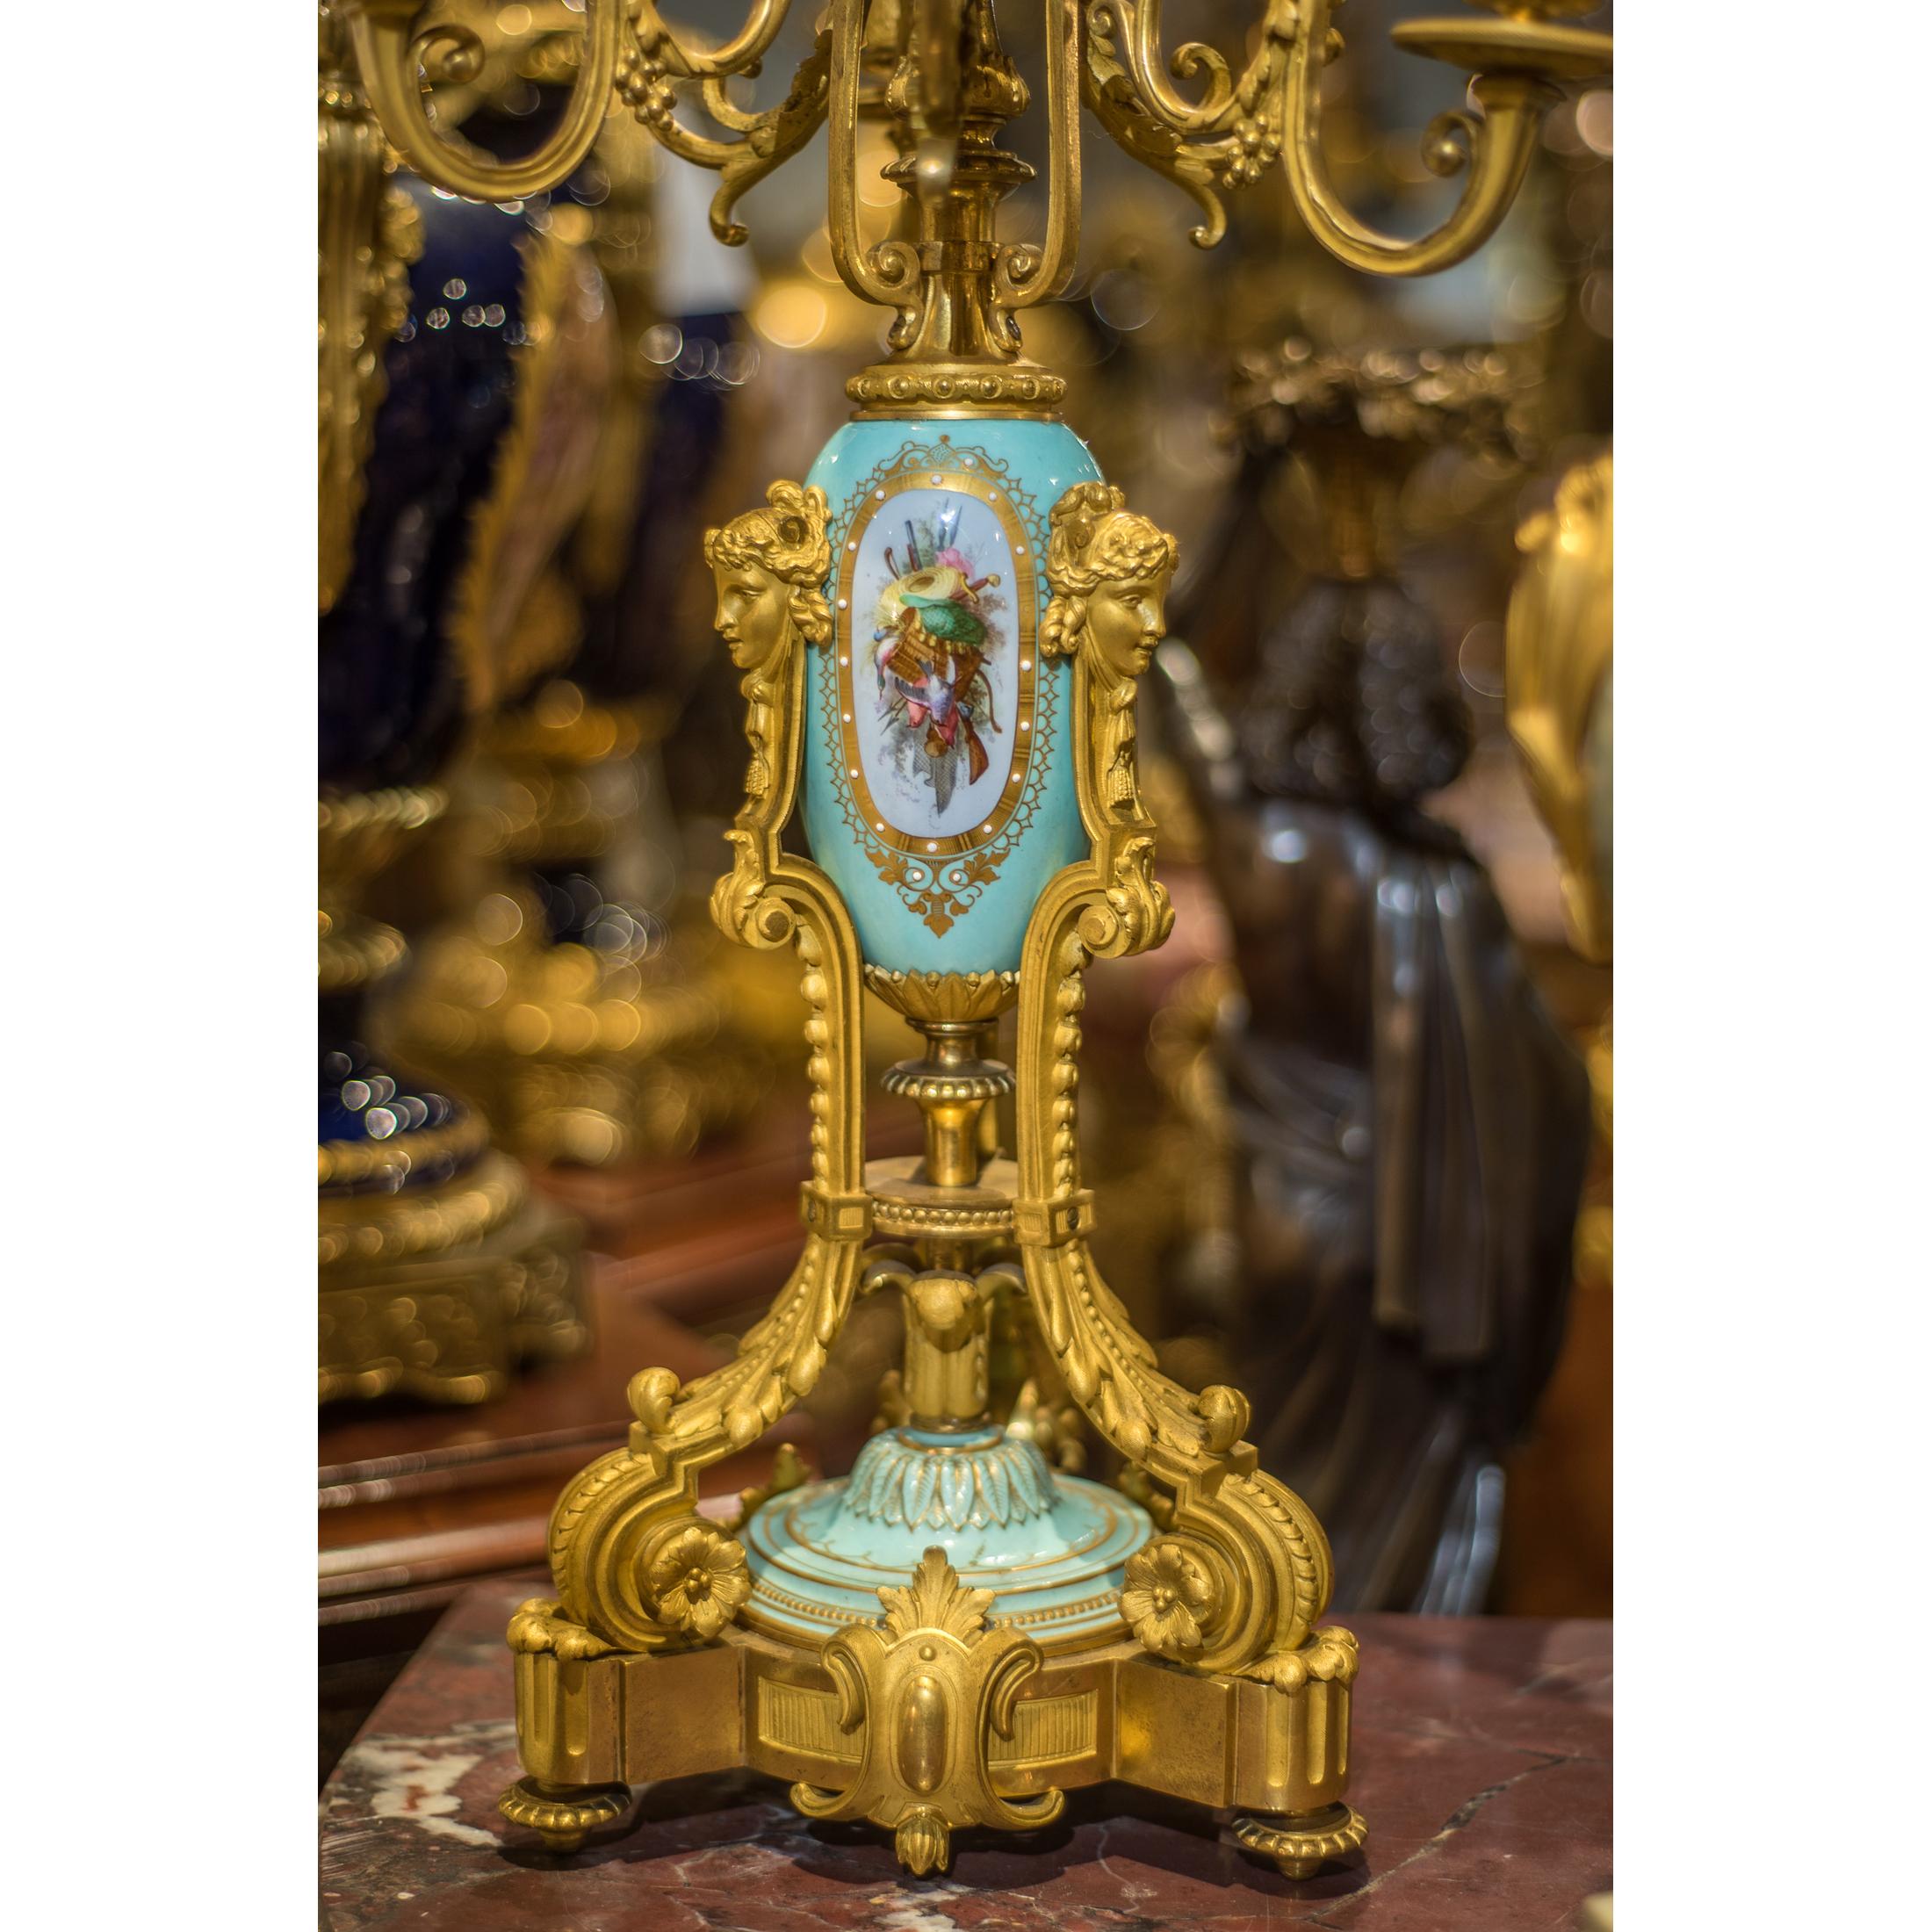 A sophisticated Napoleon III Sèvres Porcelain mounted ormolu clock set by Grohé Paris with ram’s mask mounted ovoid clock case supported by twin putti terms on a shaped base set with floral decorated porcelain panels. The works inscribed Grohé Paris